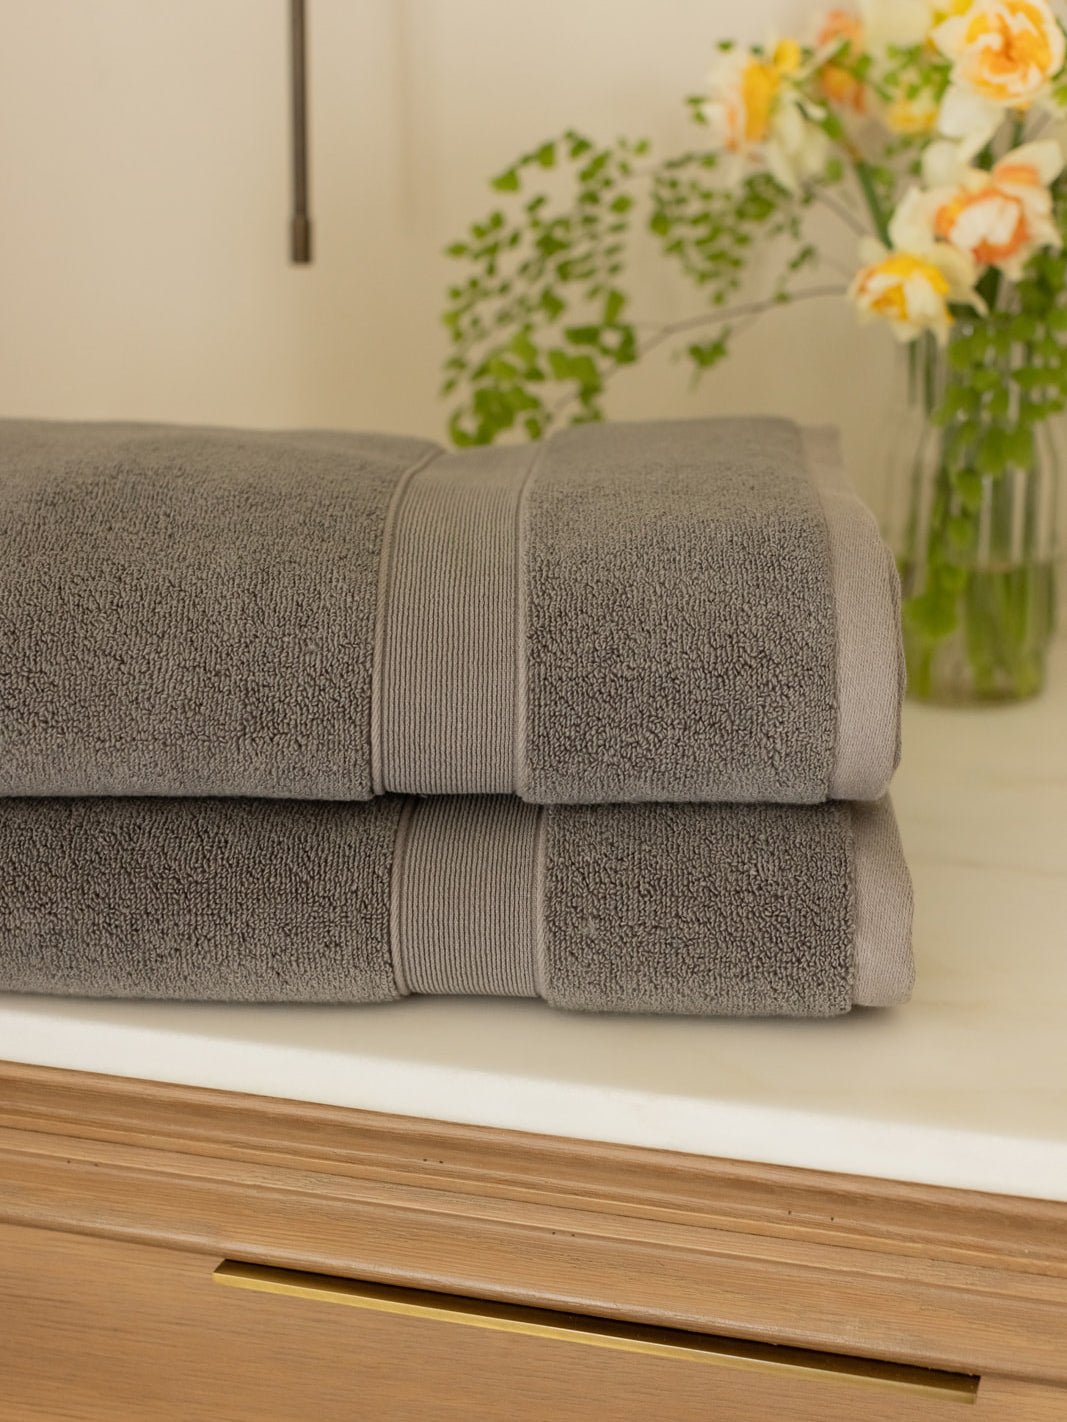 Two luxe bath sheets folded on bathroom sink |Color:Charcoal